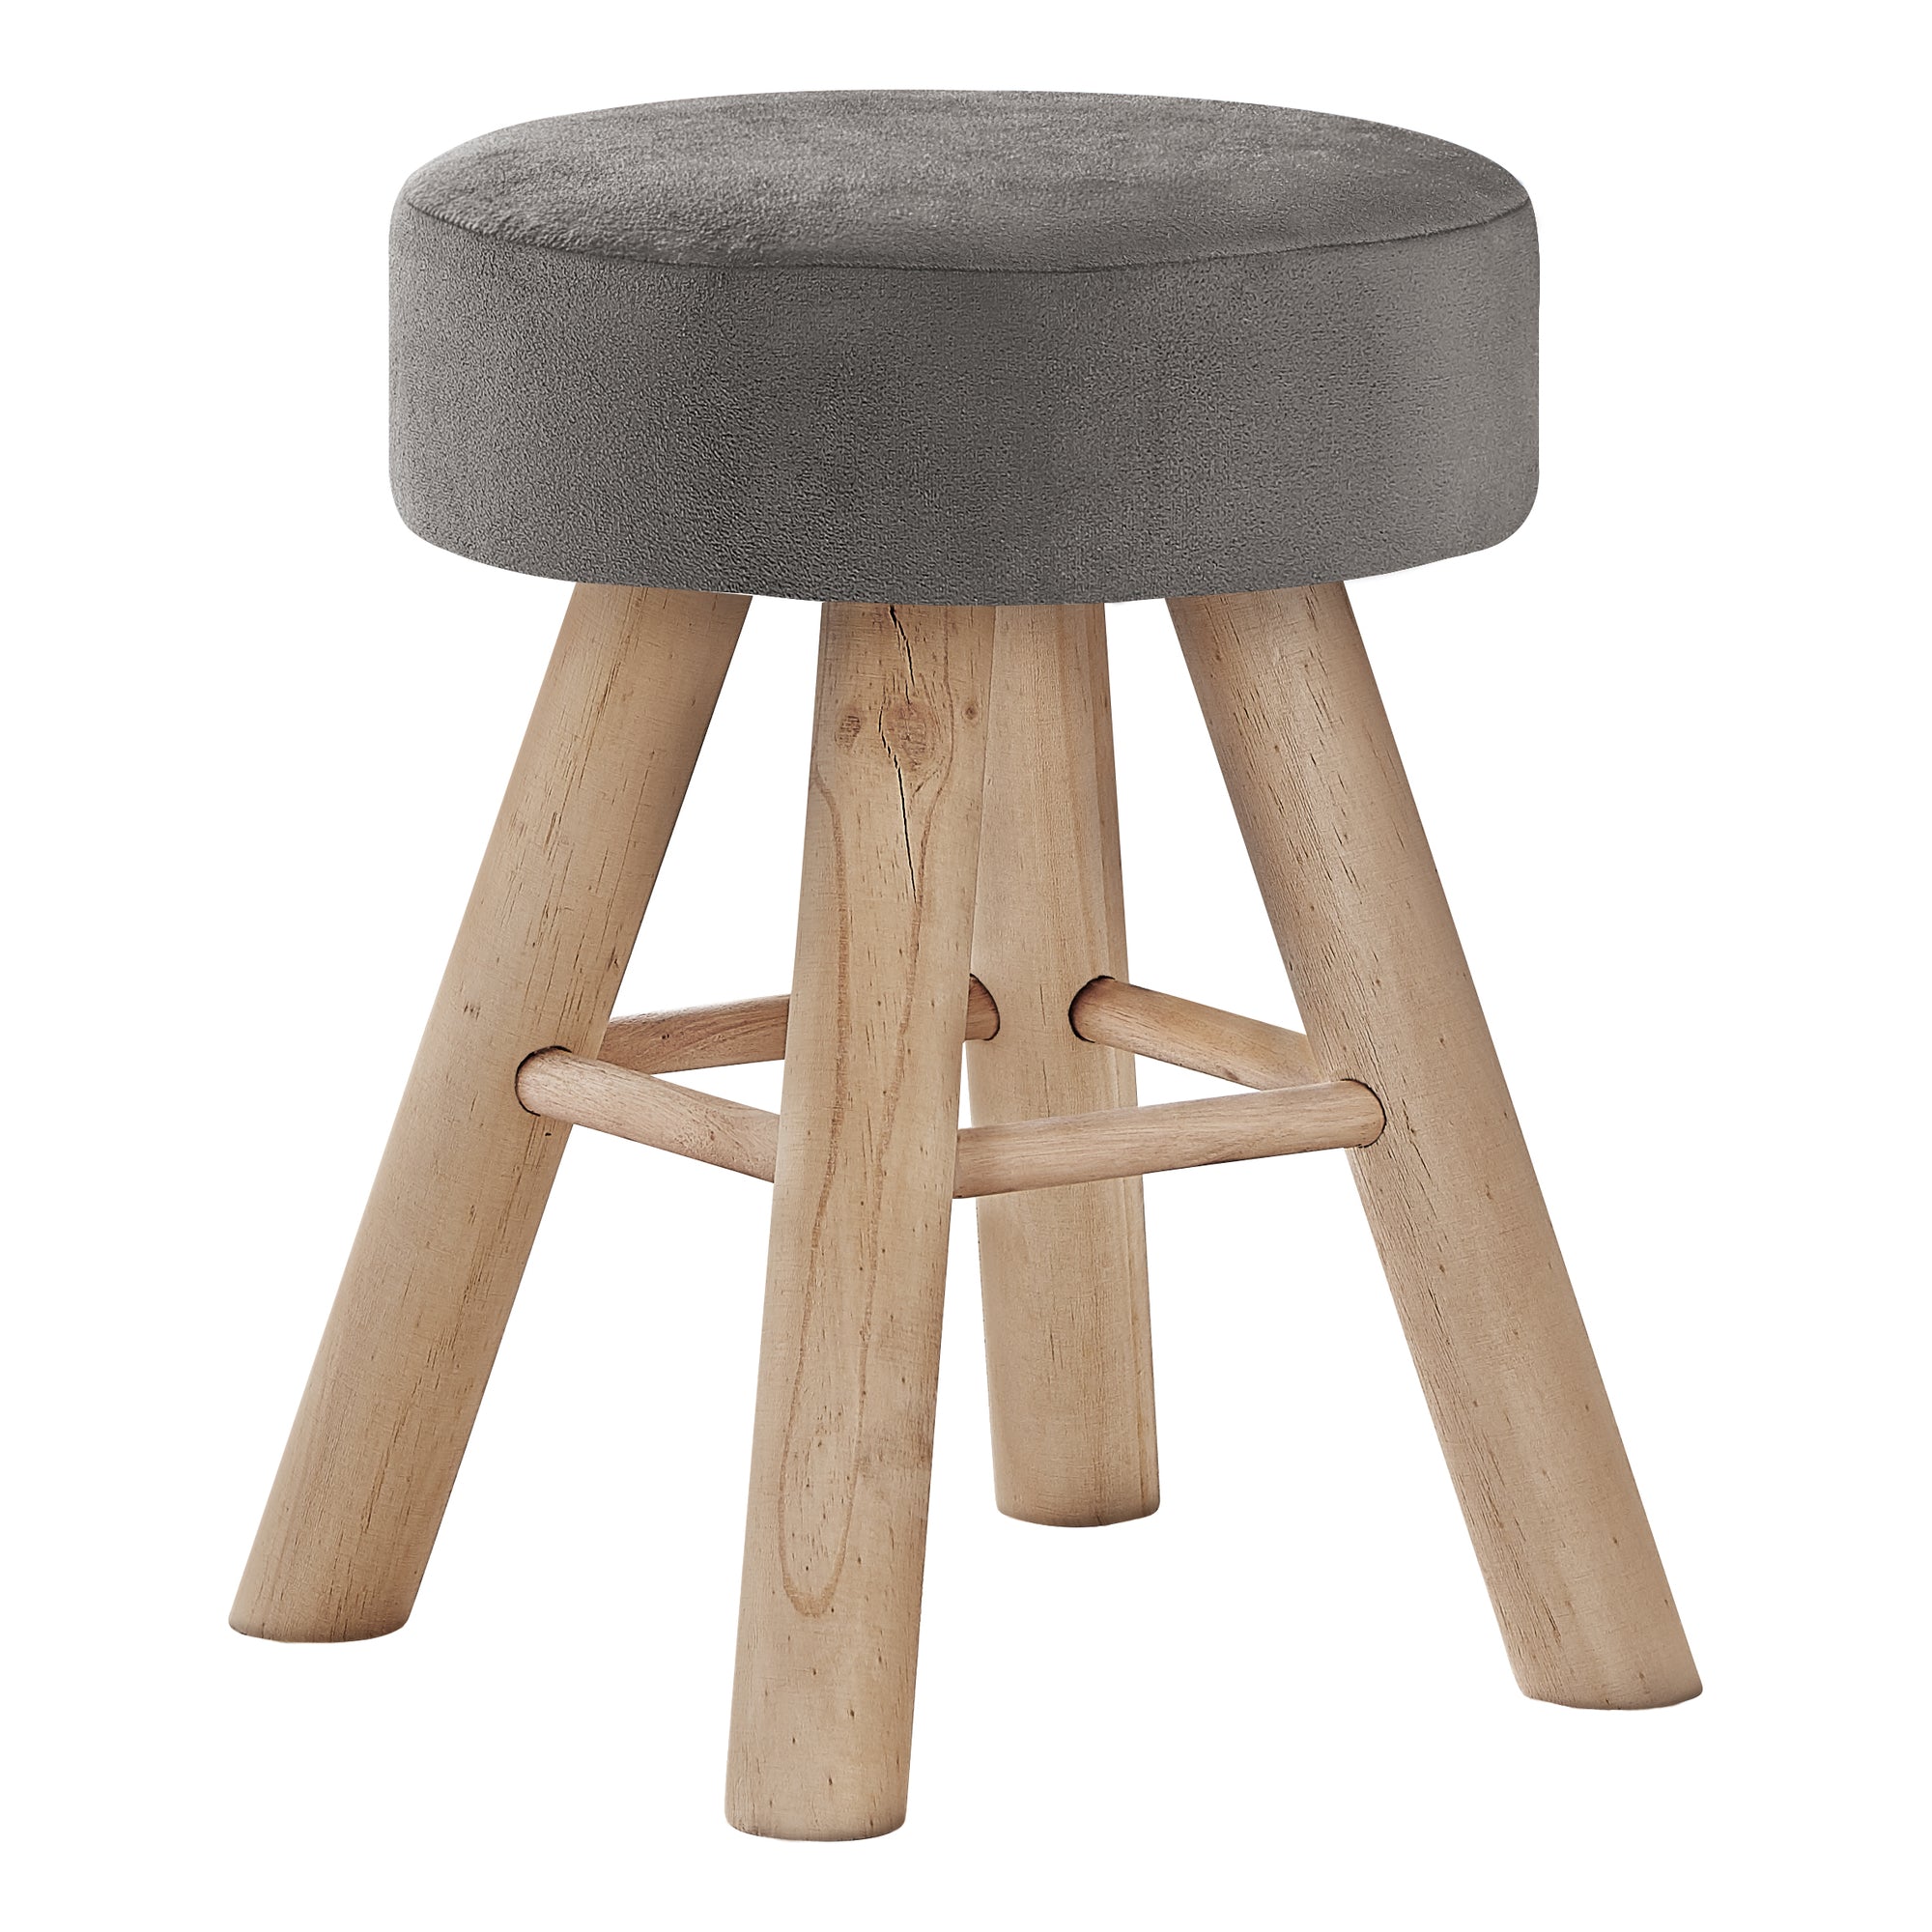 MN-259010    Ottoman, Pouf, Footrest, Foot Stool, 12" Round, Velvet Fabric, Wood Legs, Grey, Natural, Contemporary, Modern